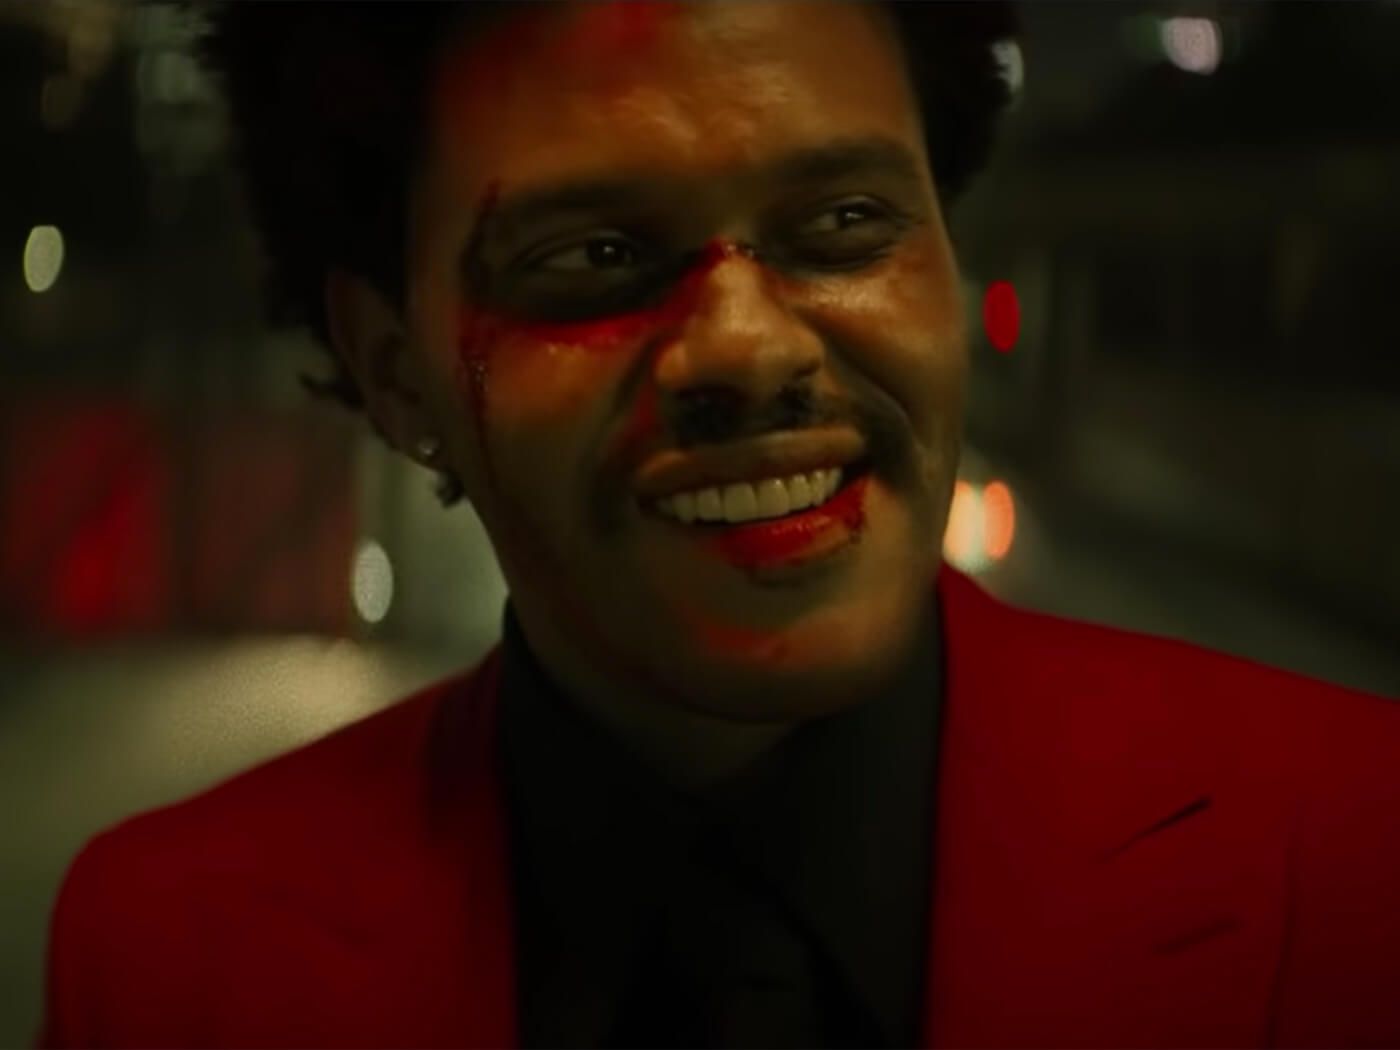 The Weeknd goes on a wild ride in video for “Blinding Lights”